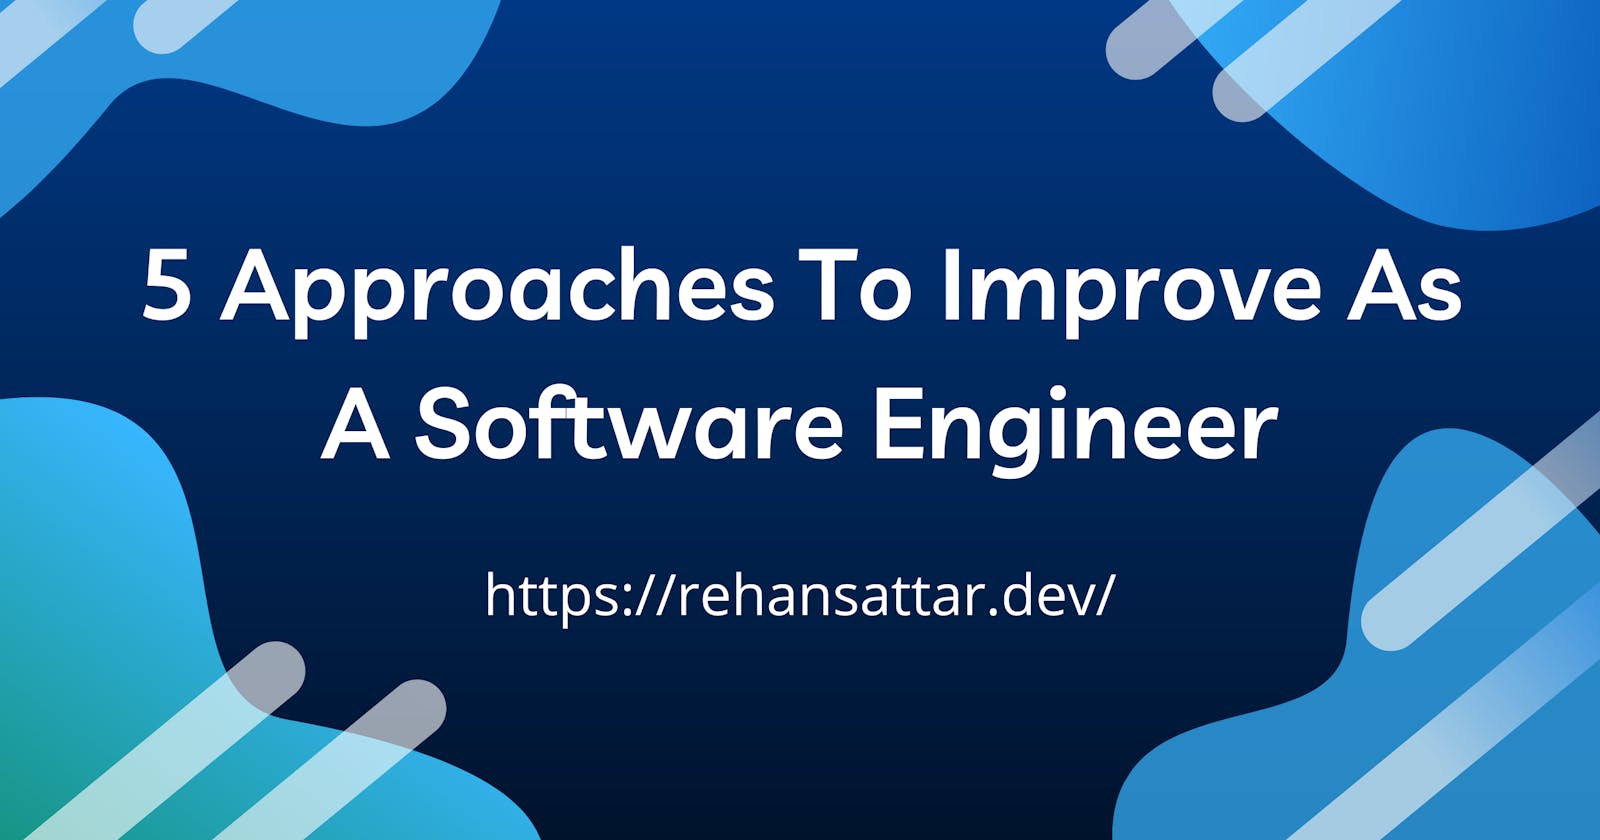 5 Approaches To Improve As A Software Engineer